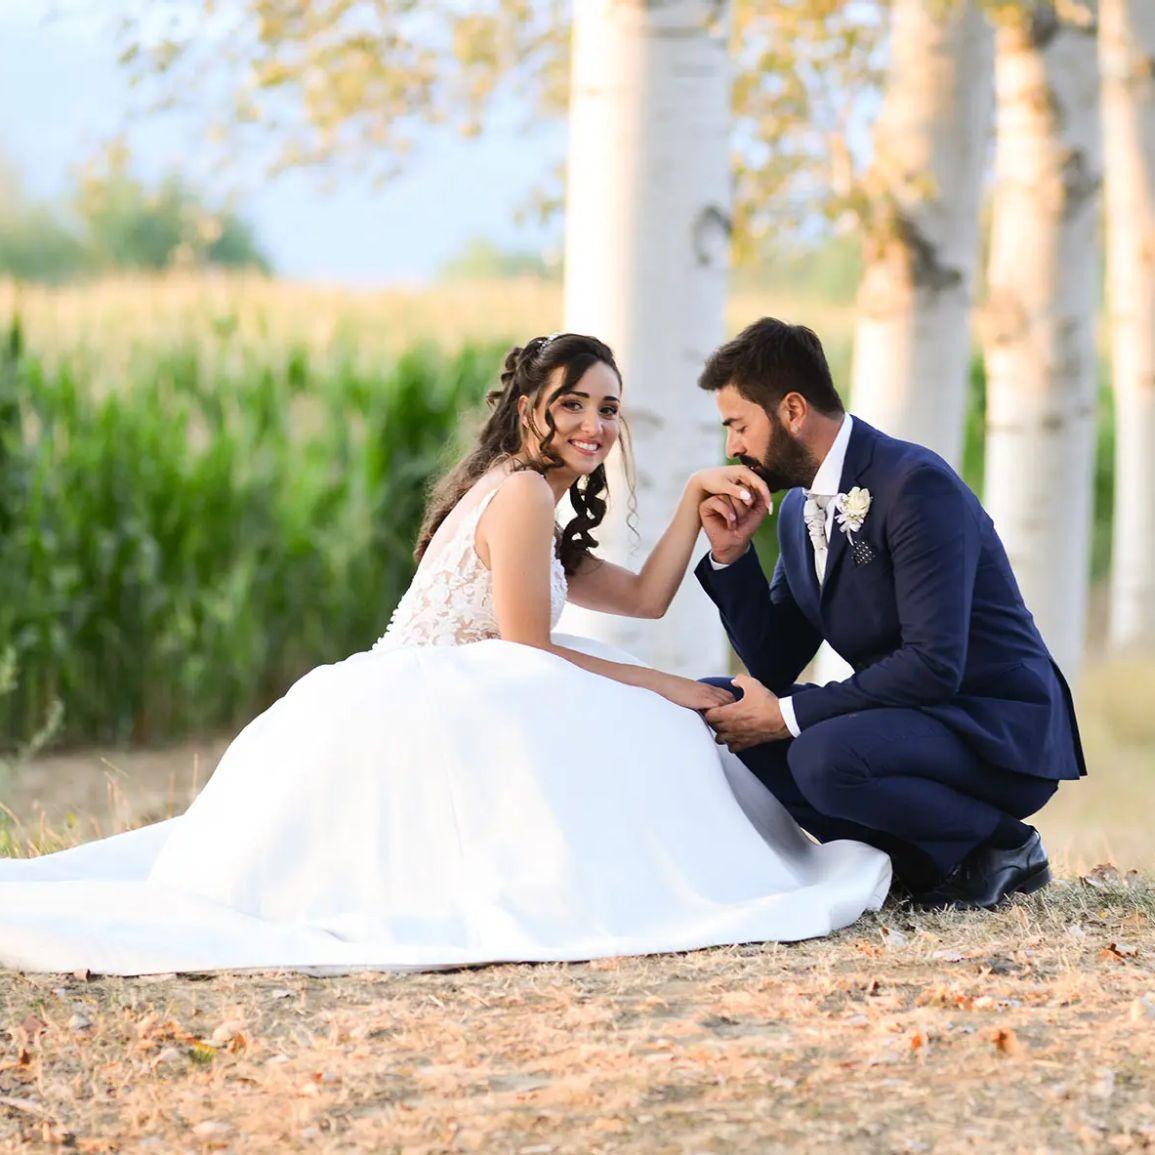 Our wedding in Tuscany